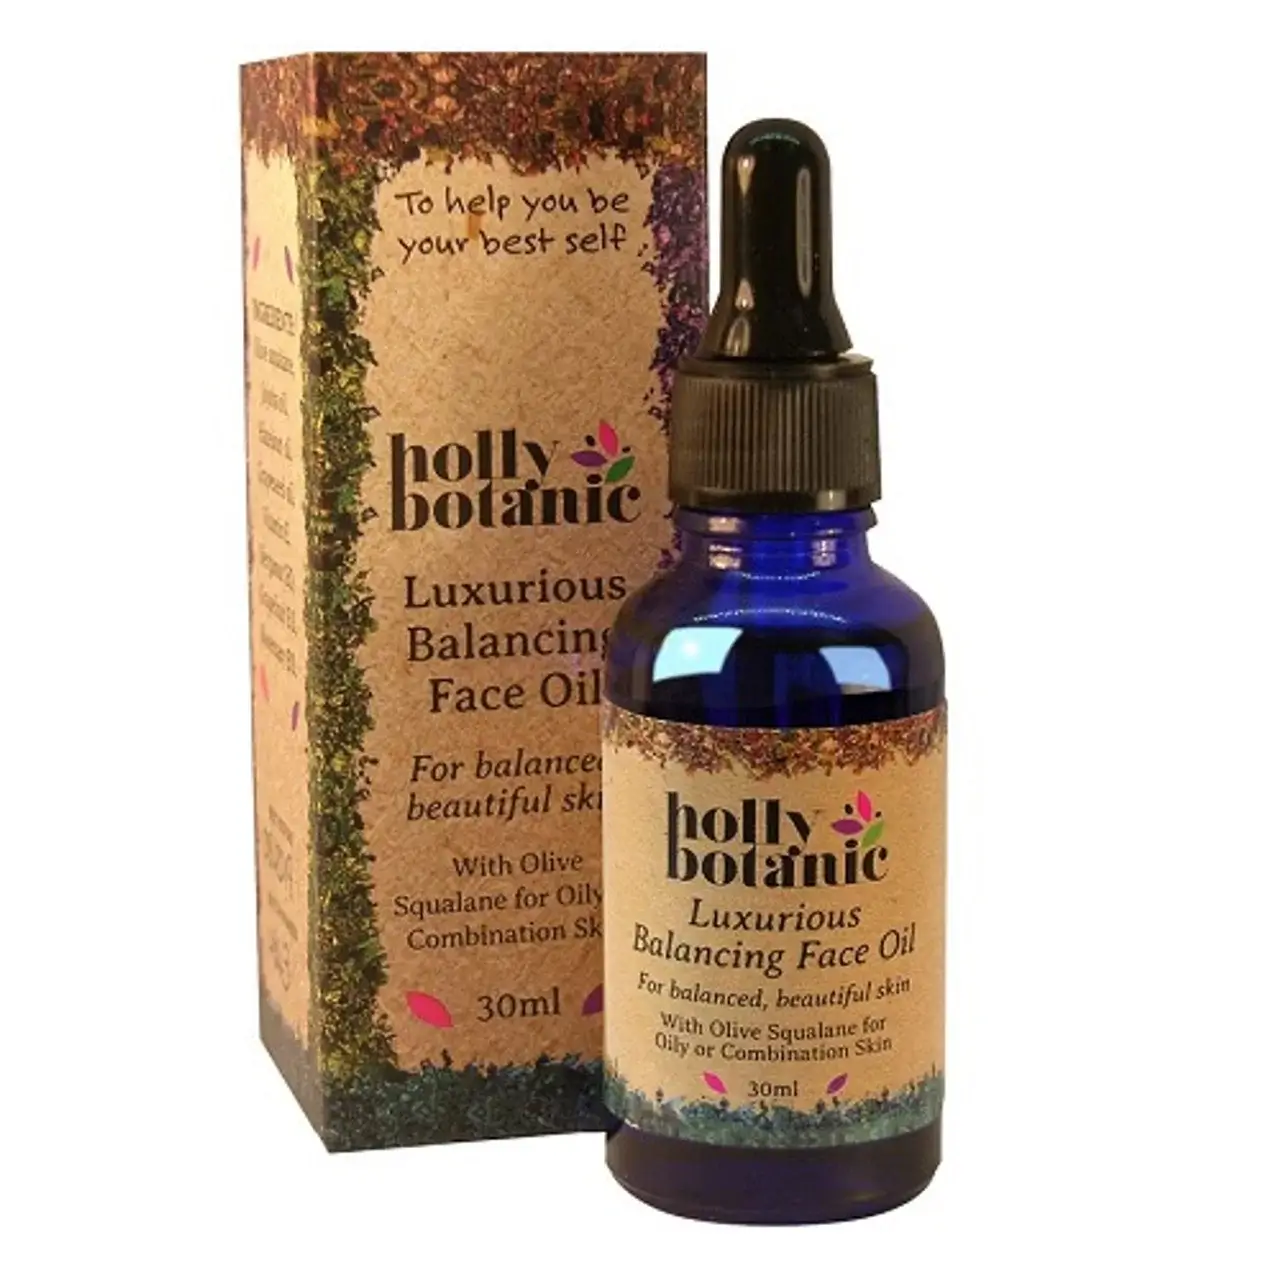 Holly Botanic balancing face oil box and bottle. 30ml glass bottle with pipette and box.